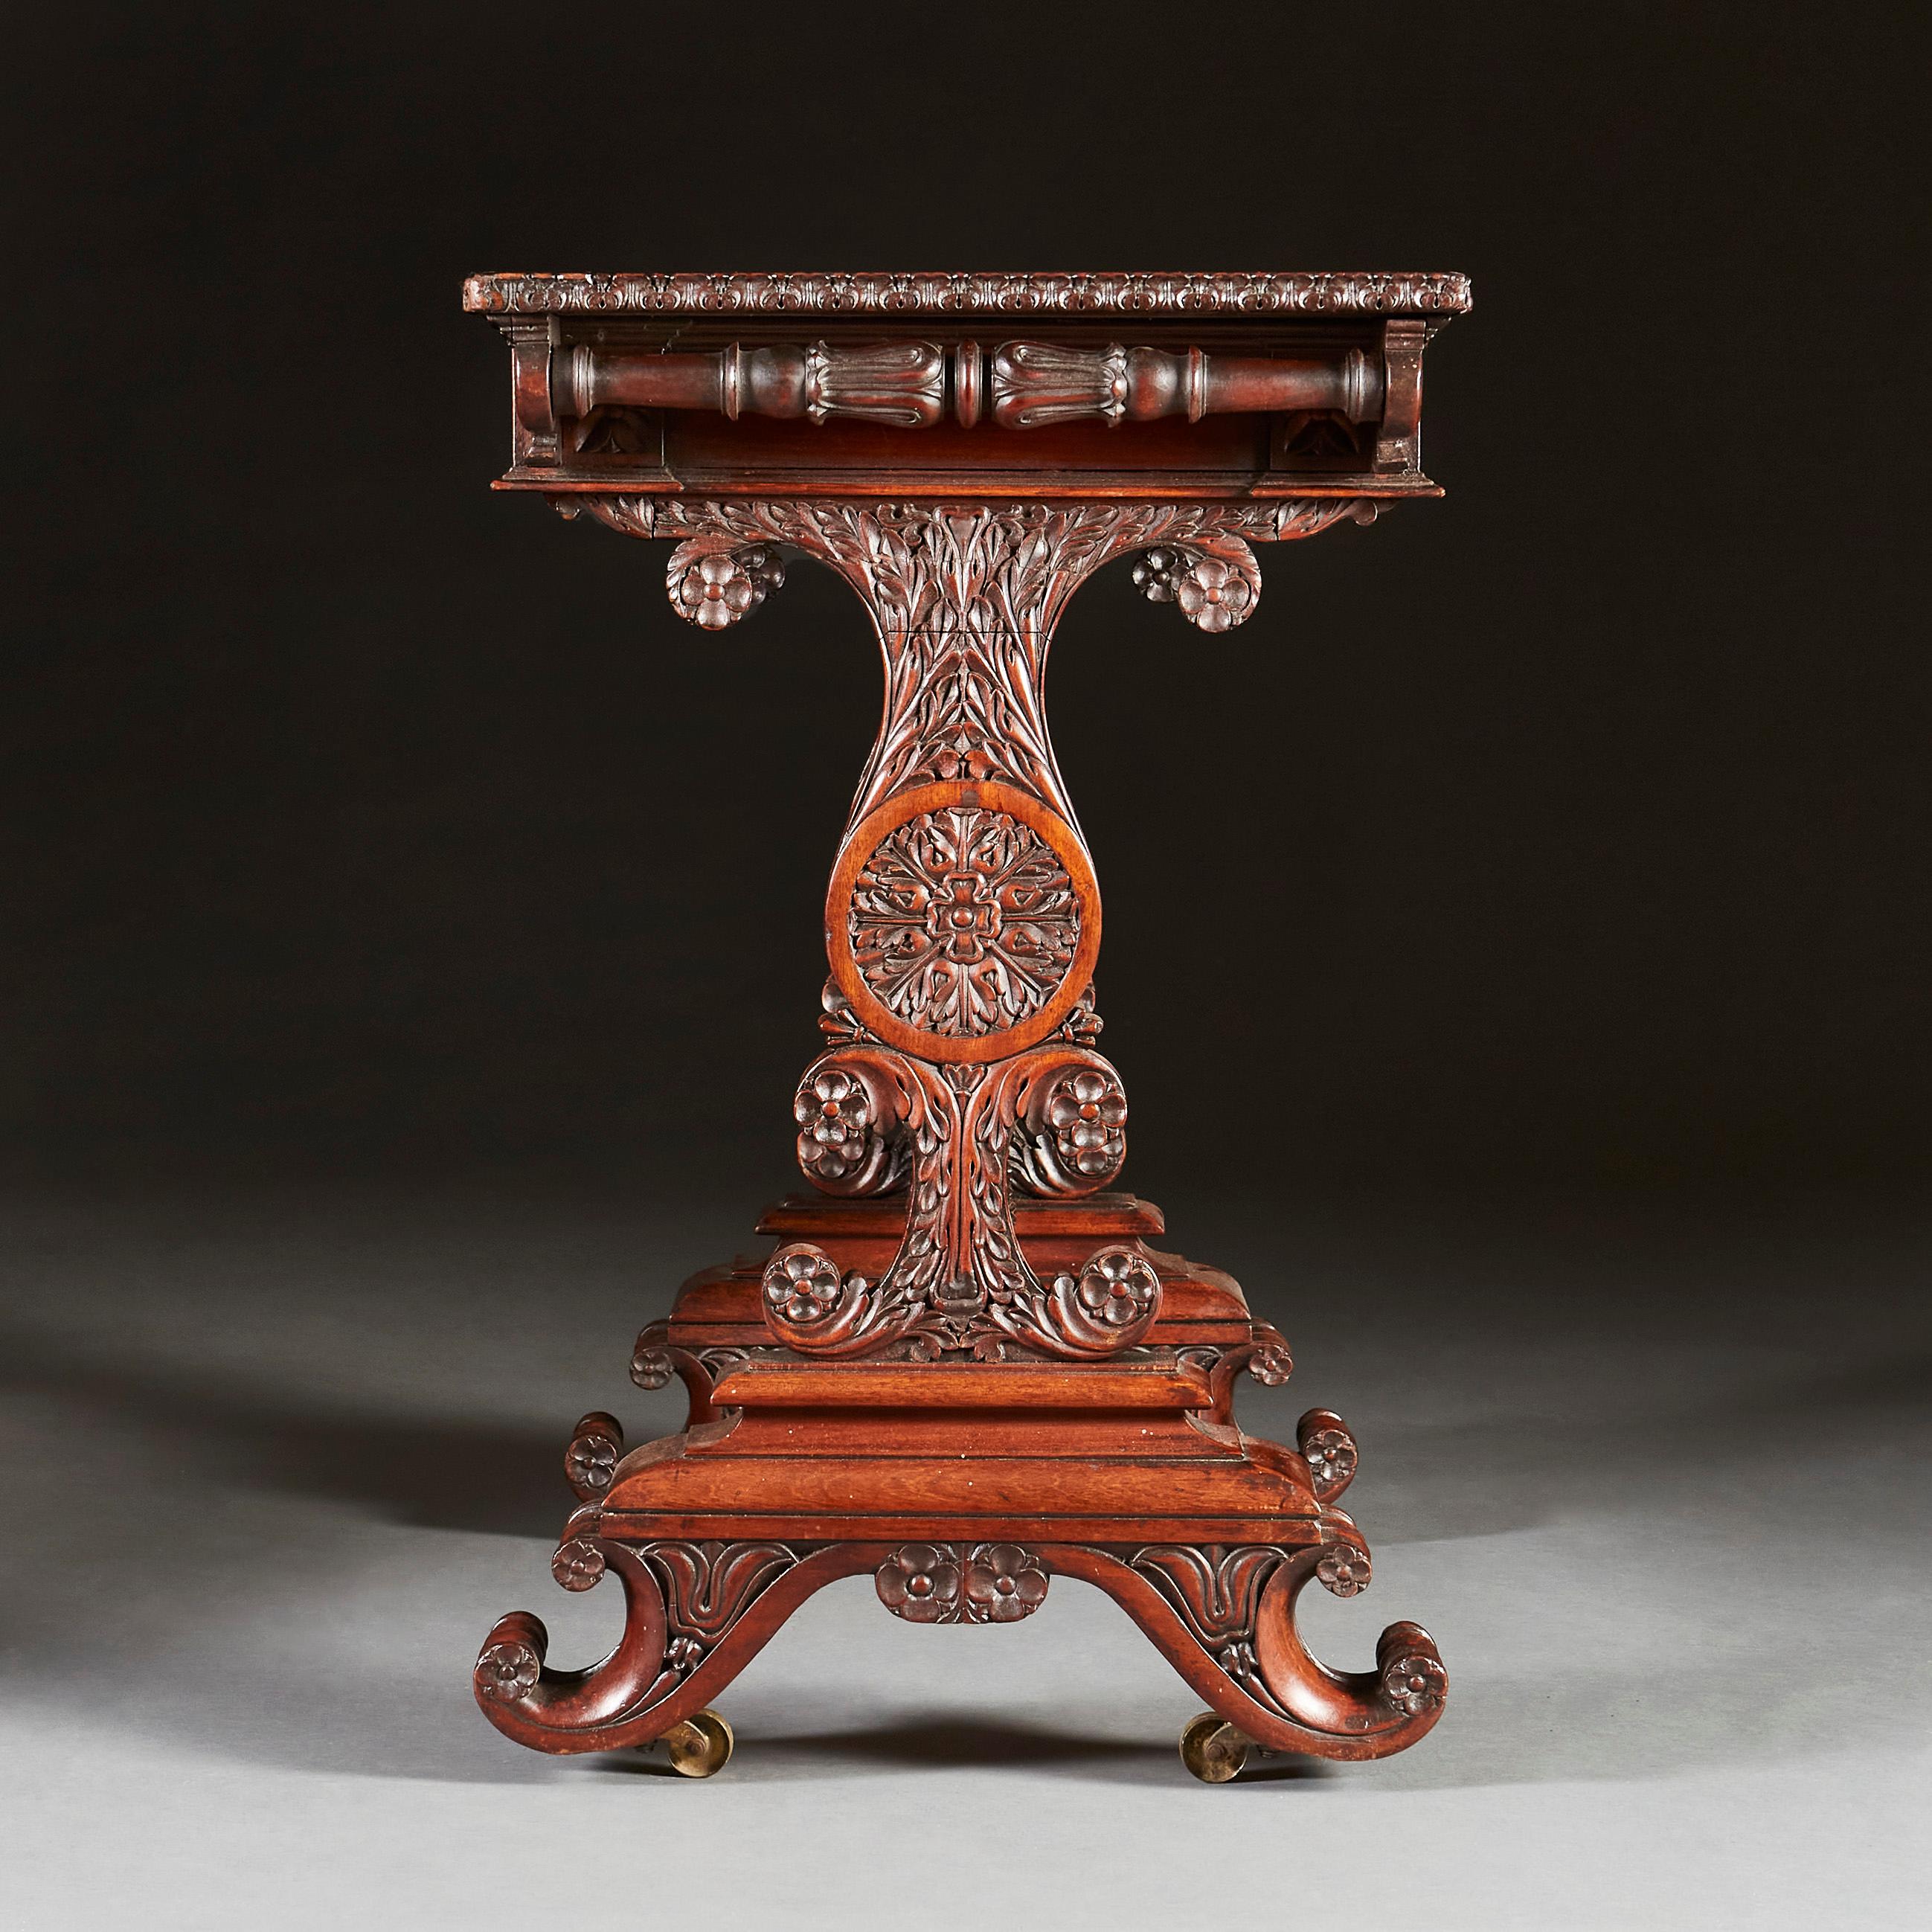 A fine William IV mahogany writing table, with deeply carved uprights with foliate designs, and carved Greek lyre stretcher and double scroll foot with brass castors, with green leather top and a single drawer to the frieze.